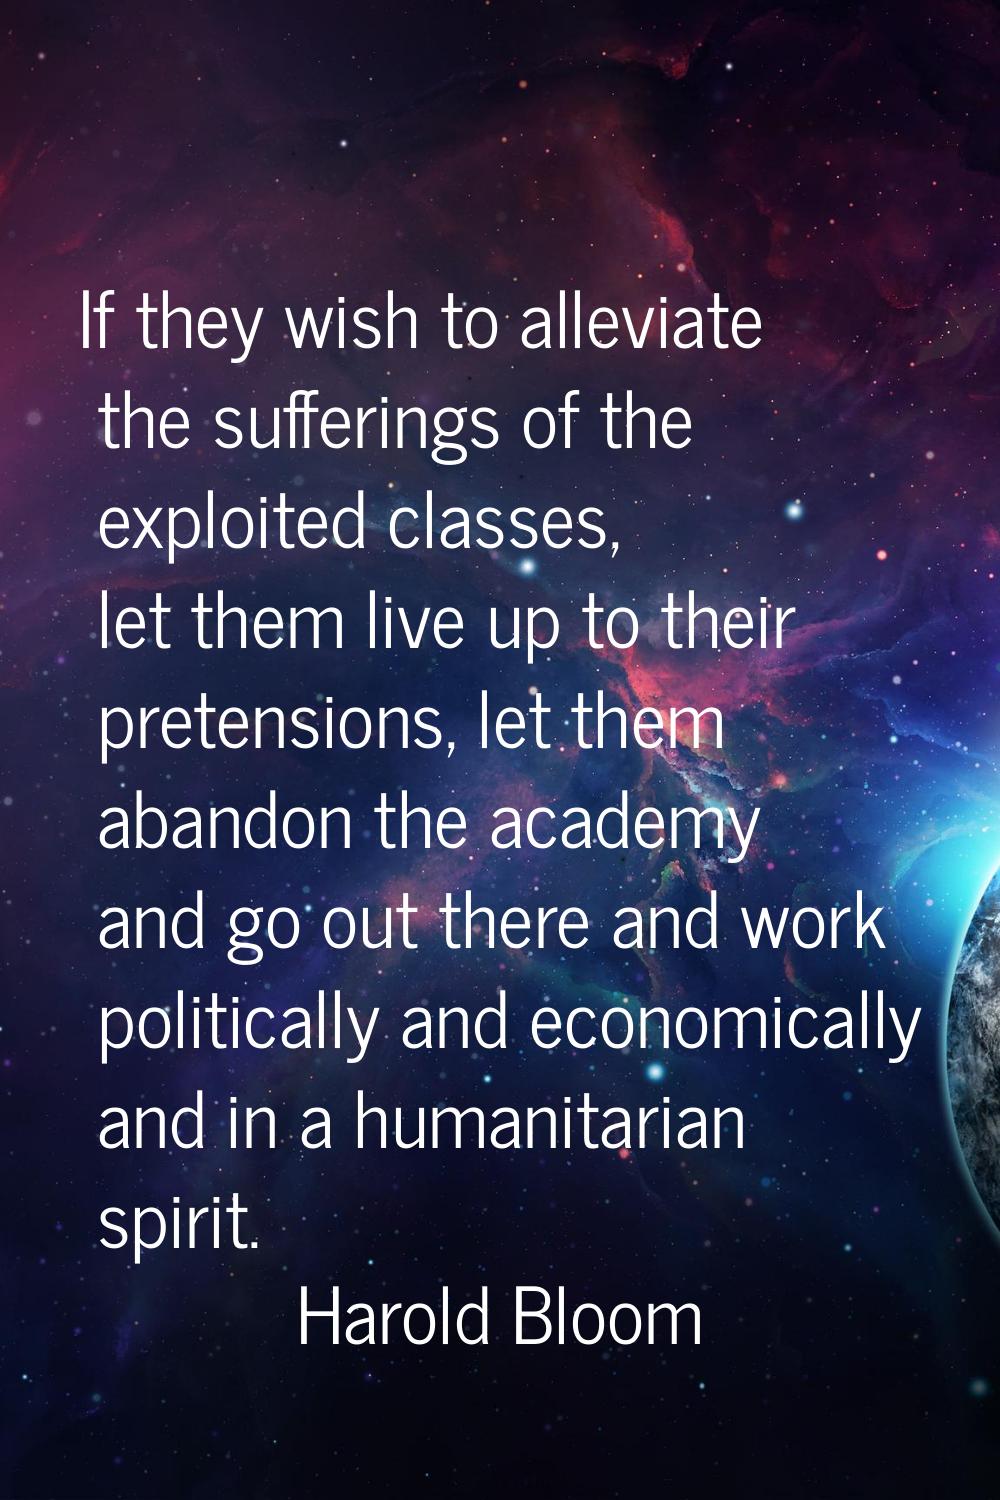 If they wish to alleviate the sufferings of the exploited classes, let them live up to their preten